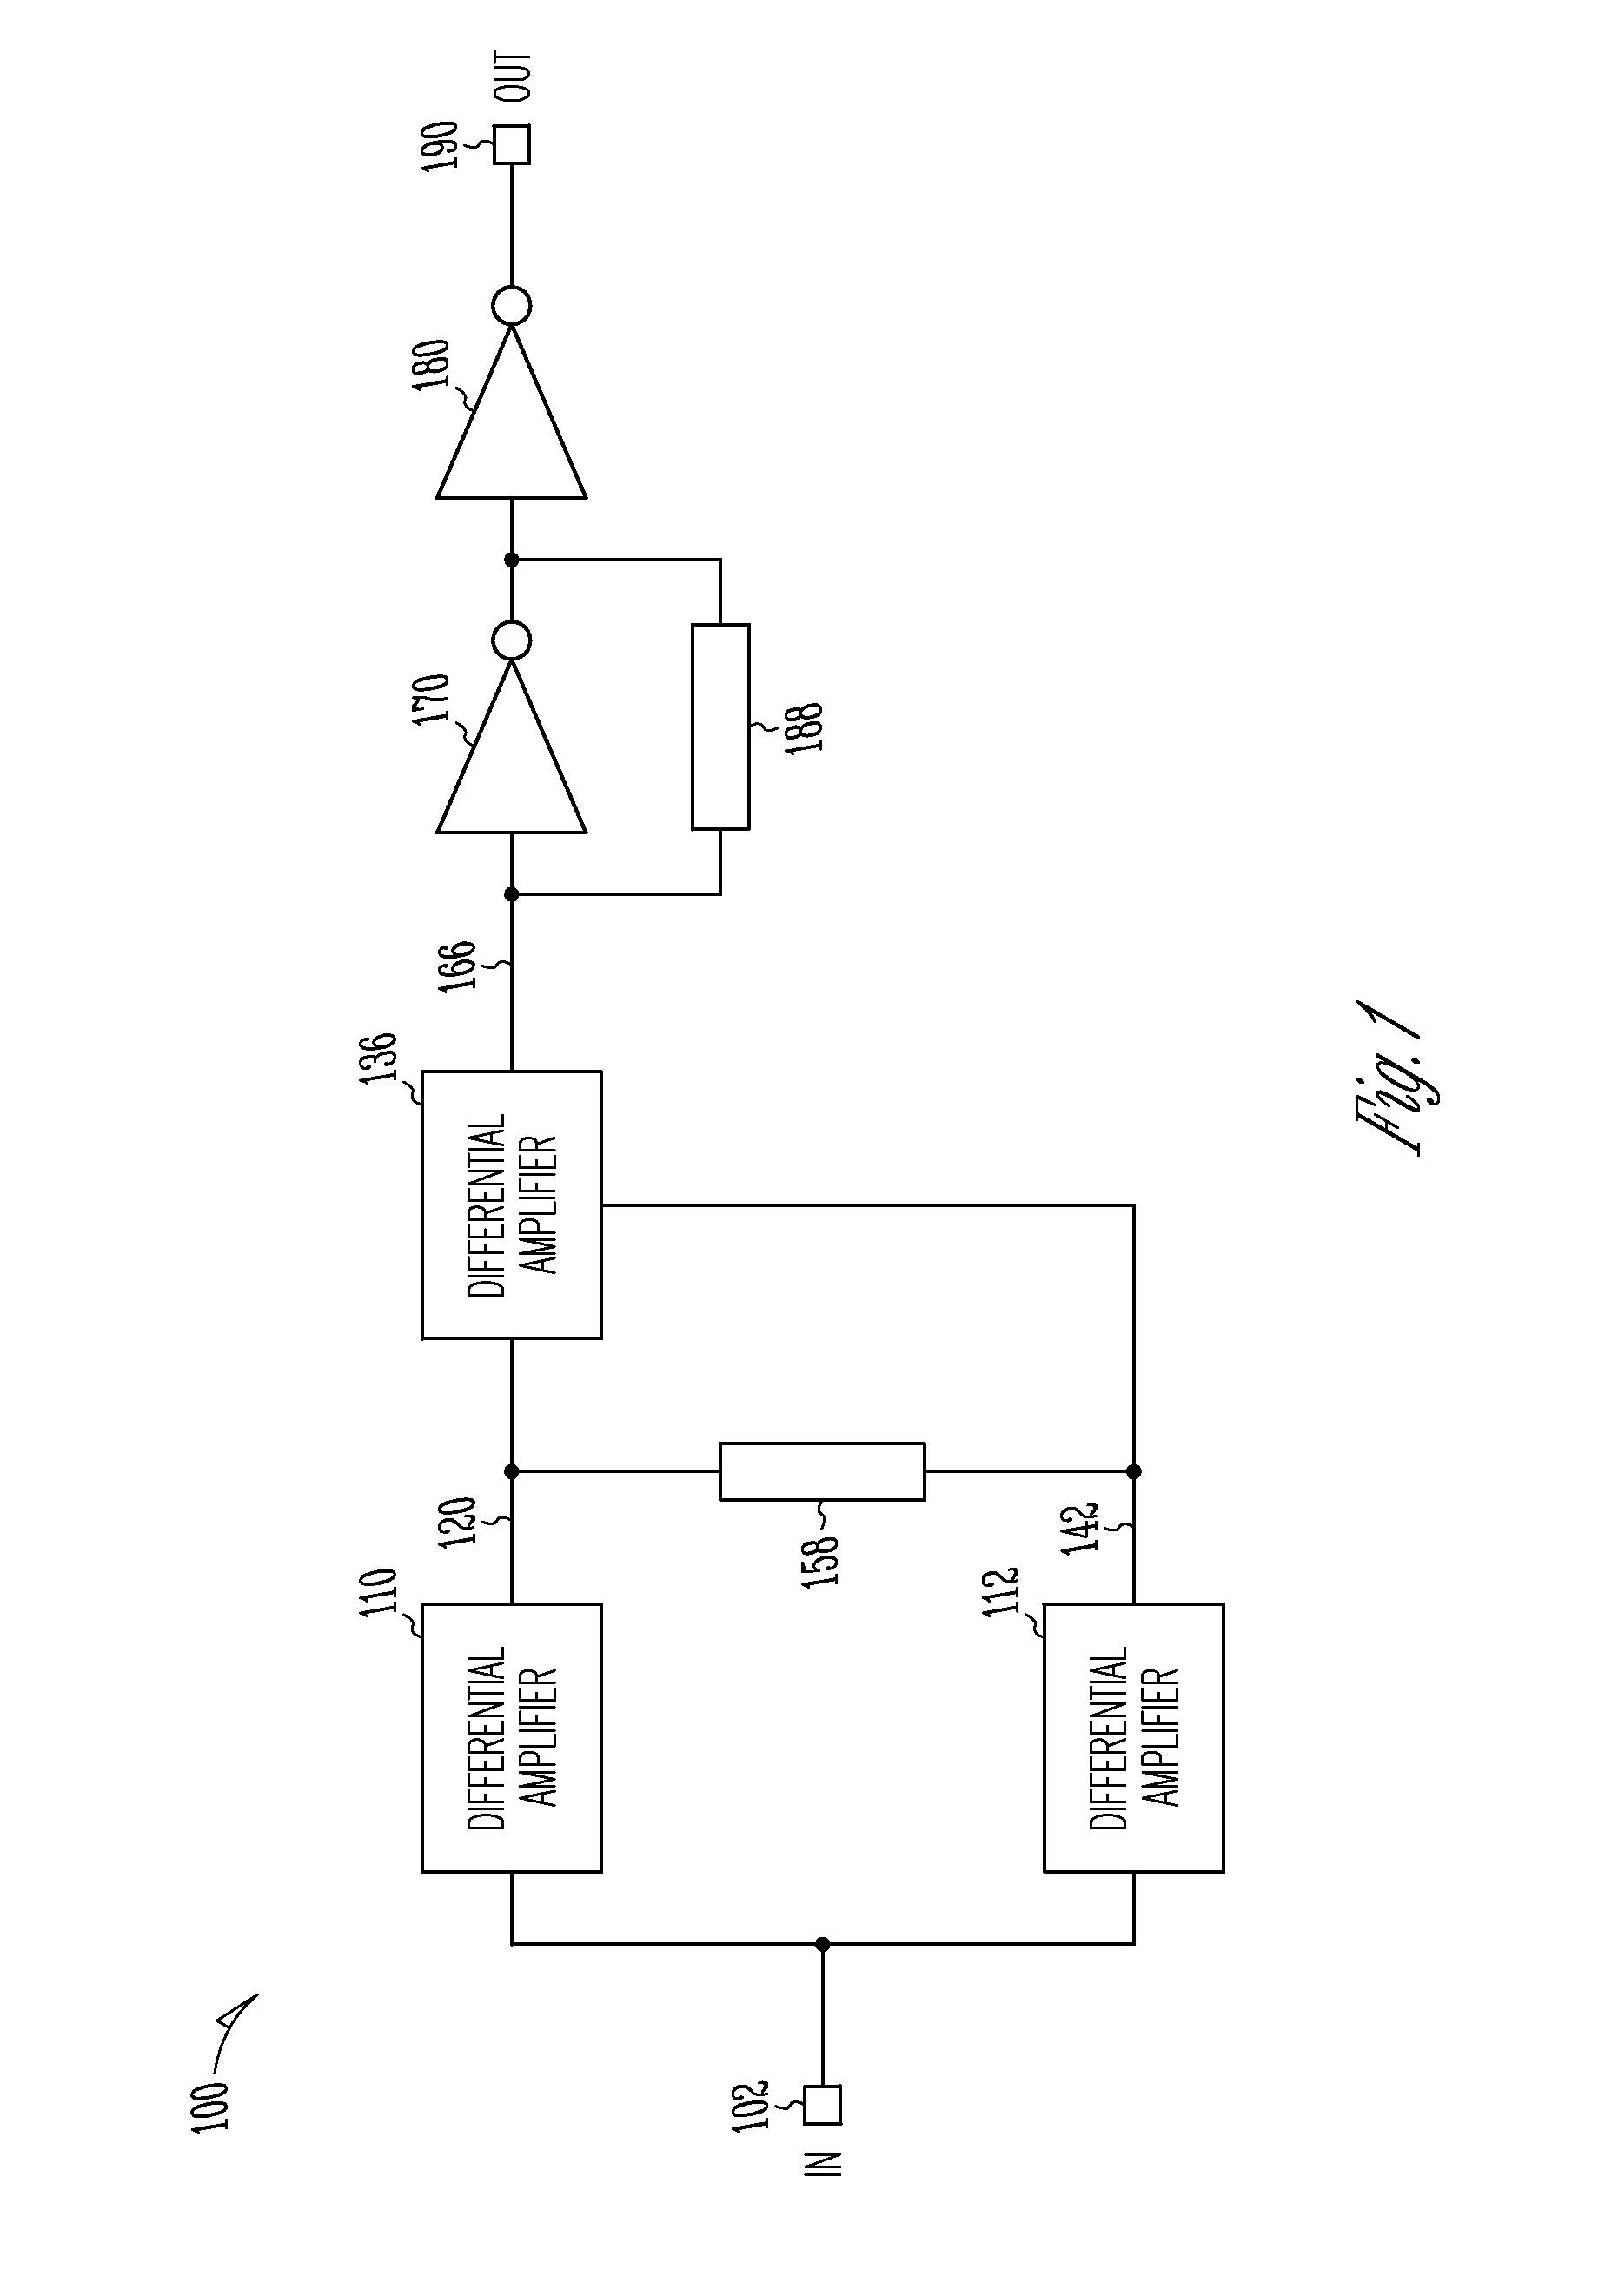 Input buffer apparatuses and methods